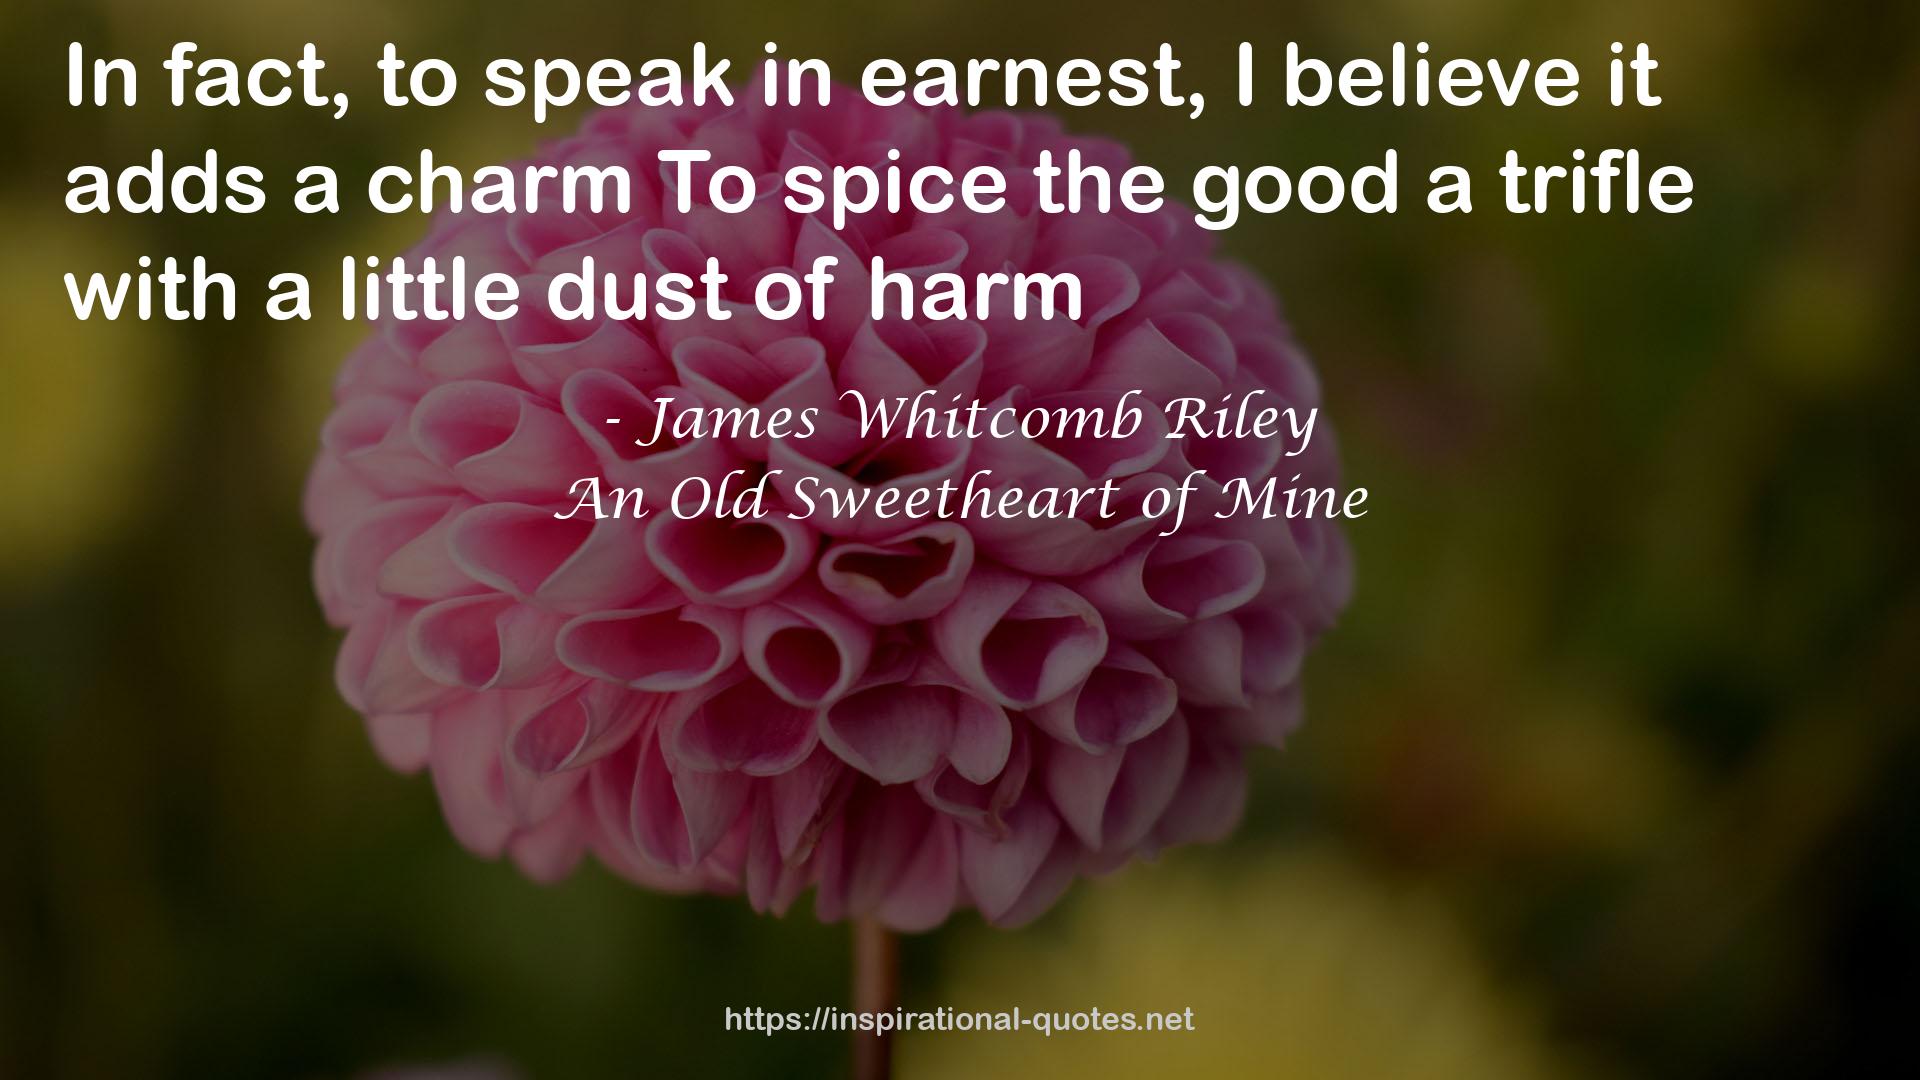 An Old Sweetheart of Mine QUOTES